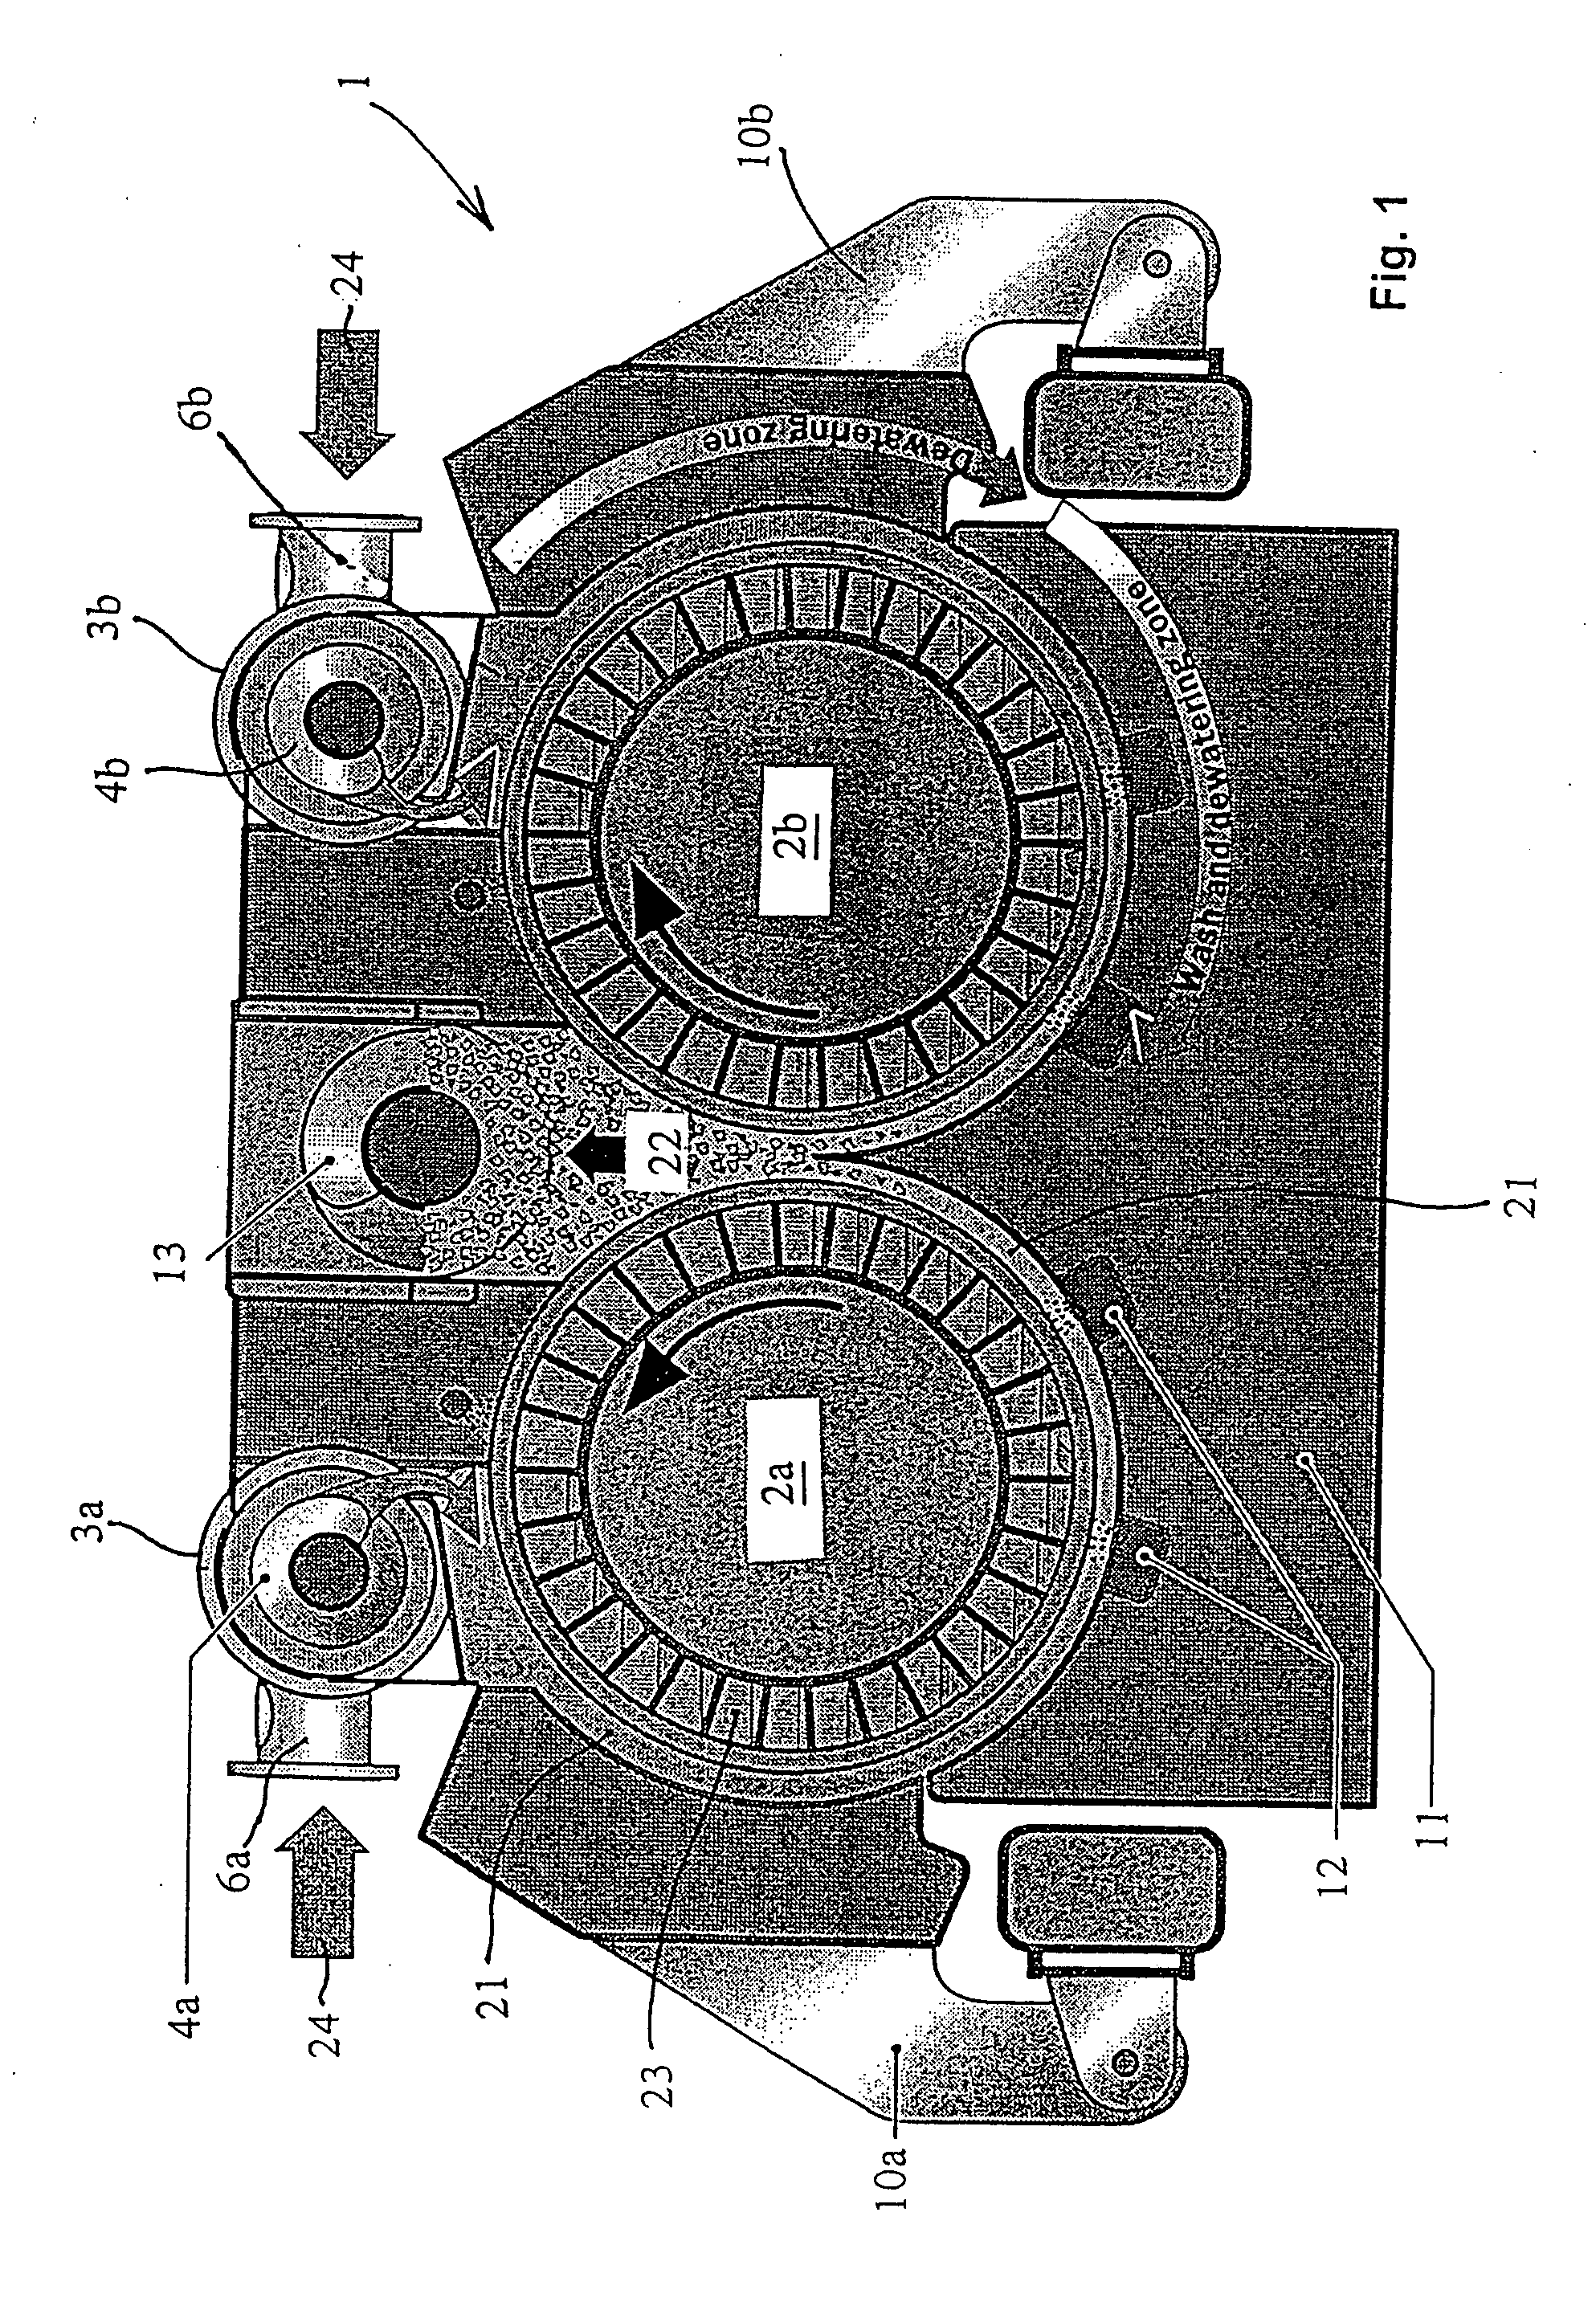 Device for distributing cellulose pulp of low and medium consistency in order to form a uniform pulp web